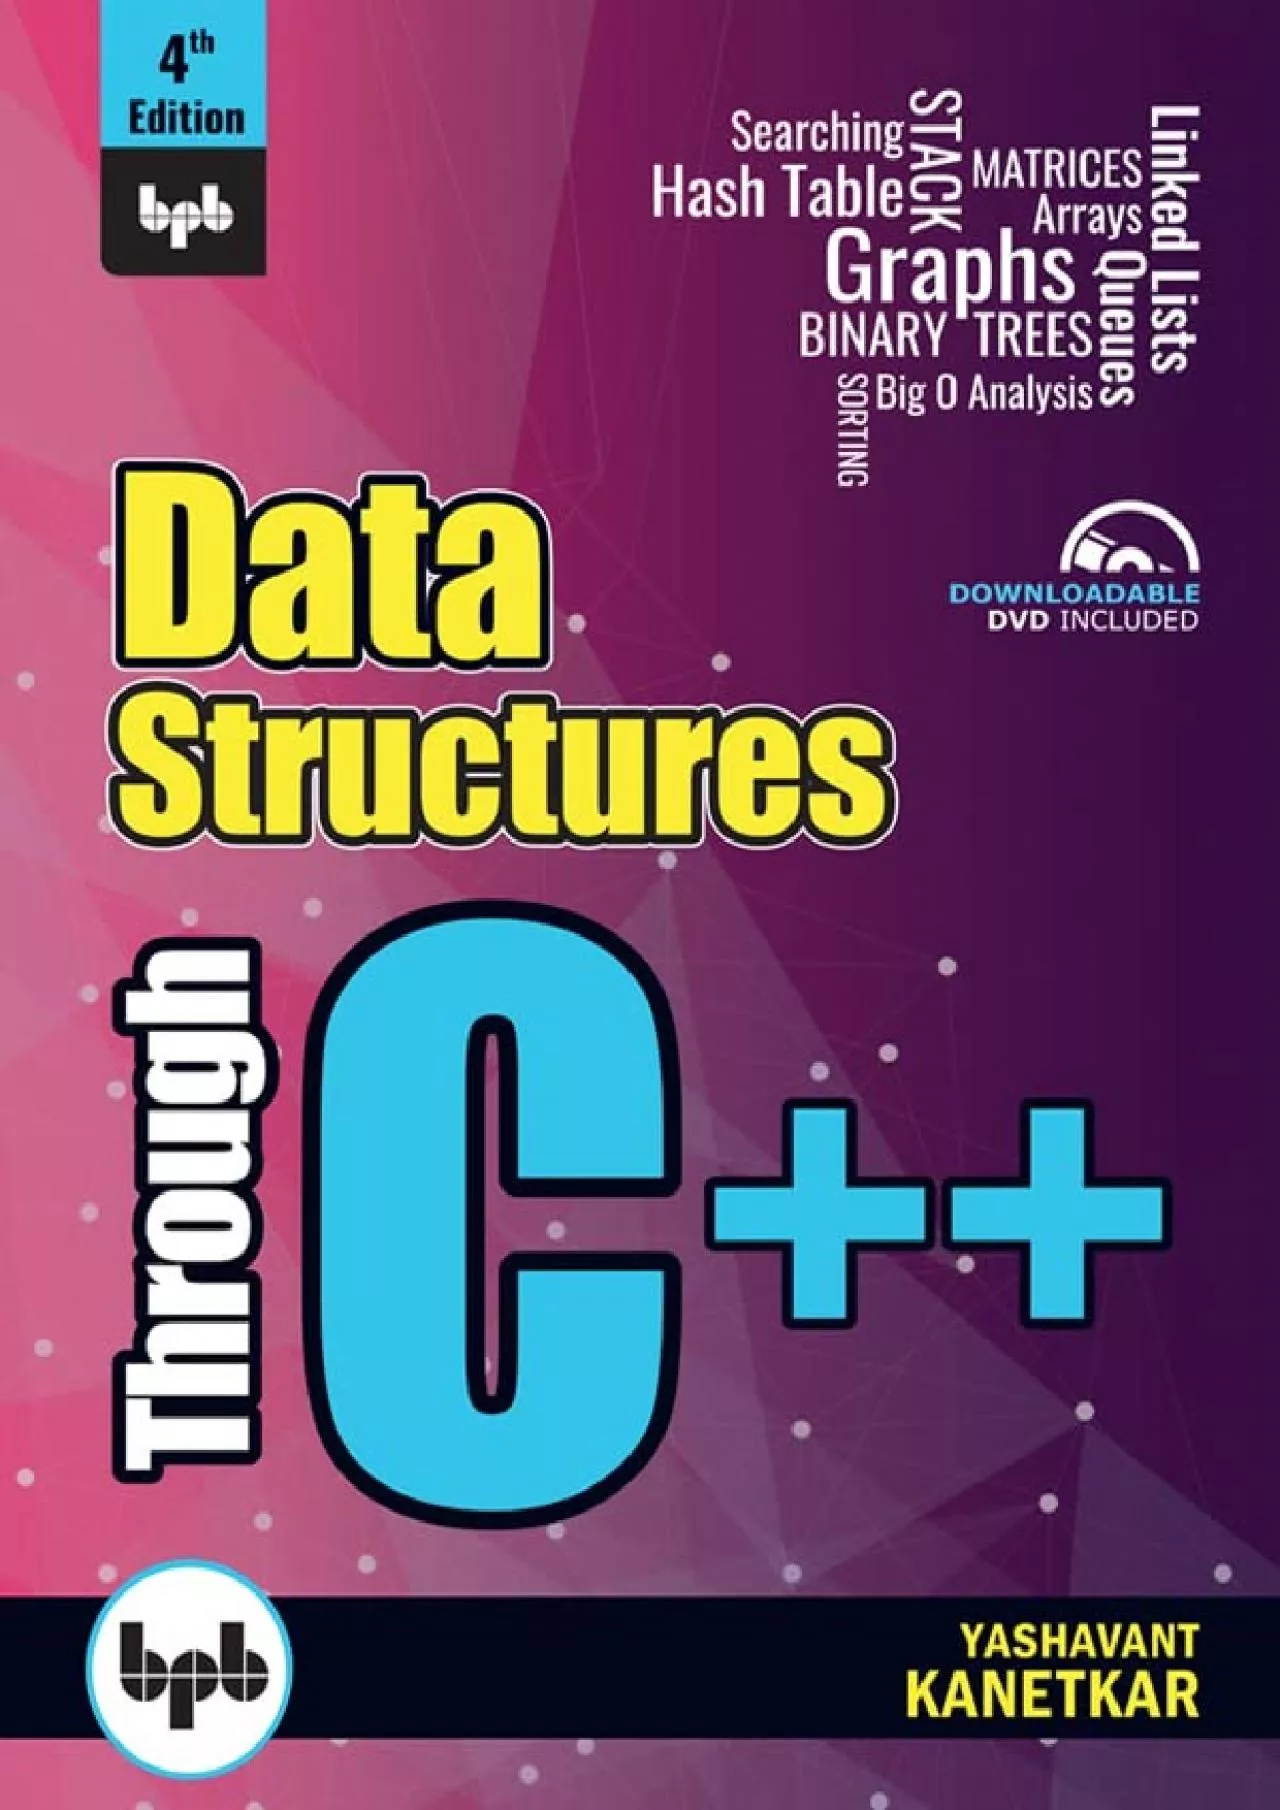 [FREE]-Data Structures Through C++ (4th Edition): Experience Data Structures C++ through